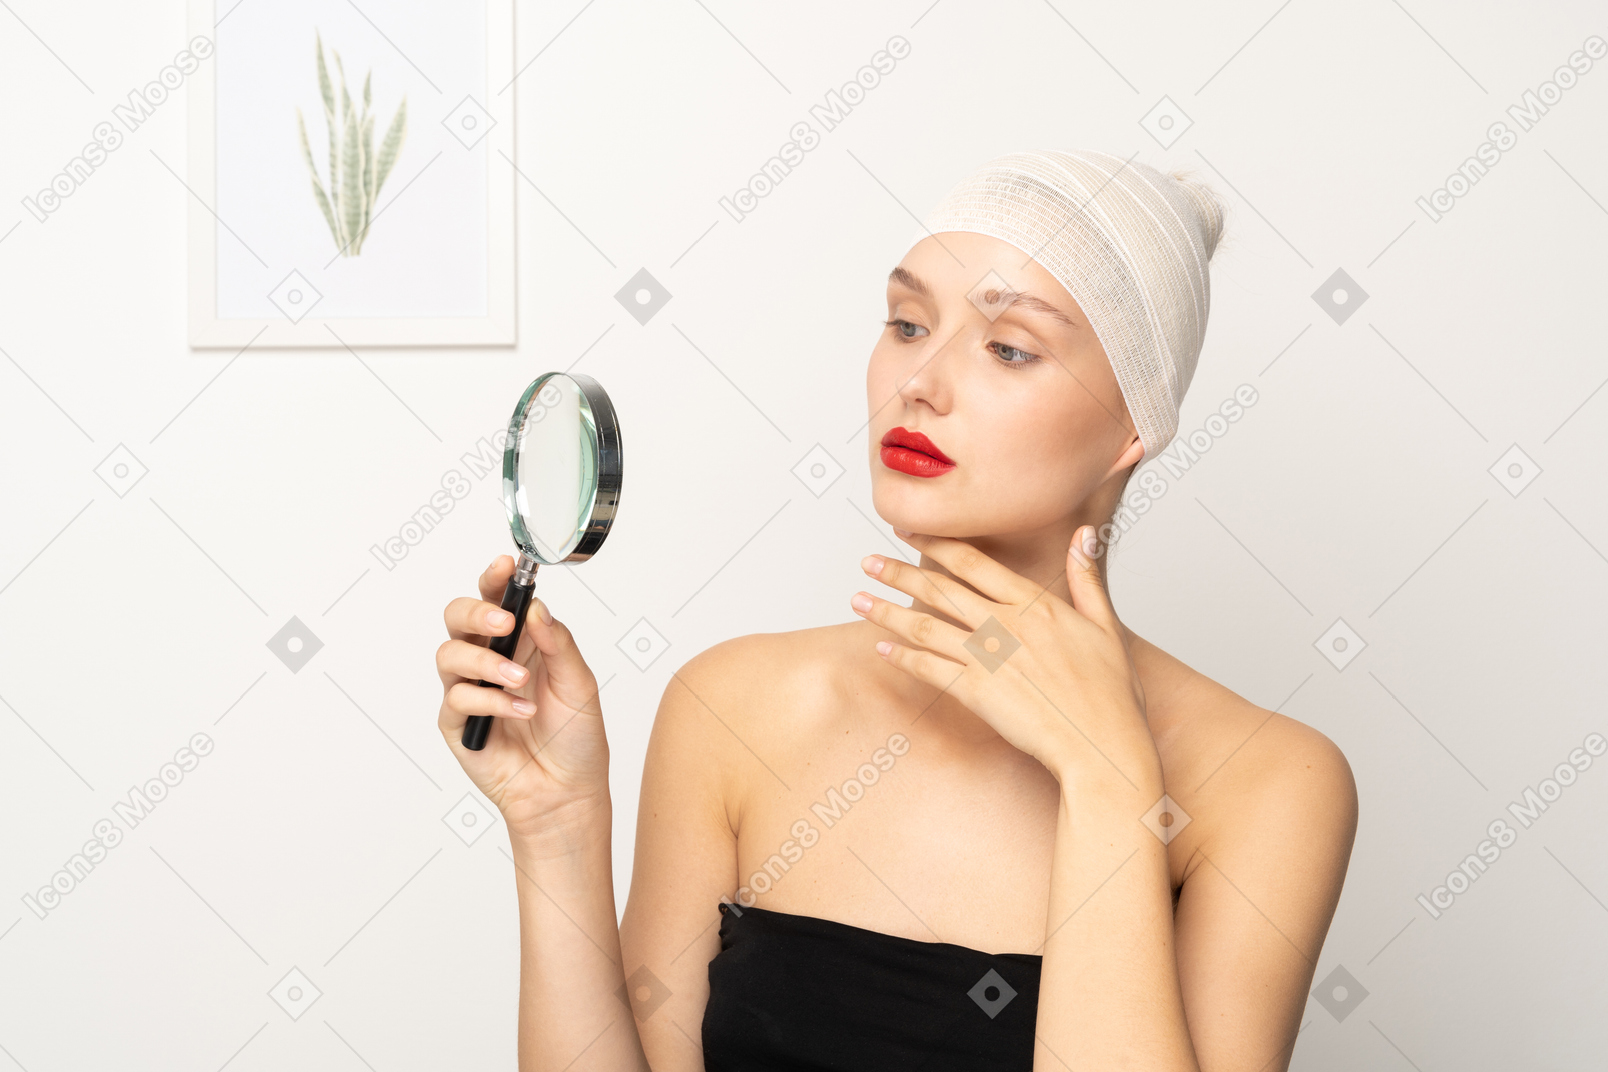 Young woman looking through magnifier and touching her chin